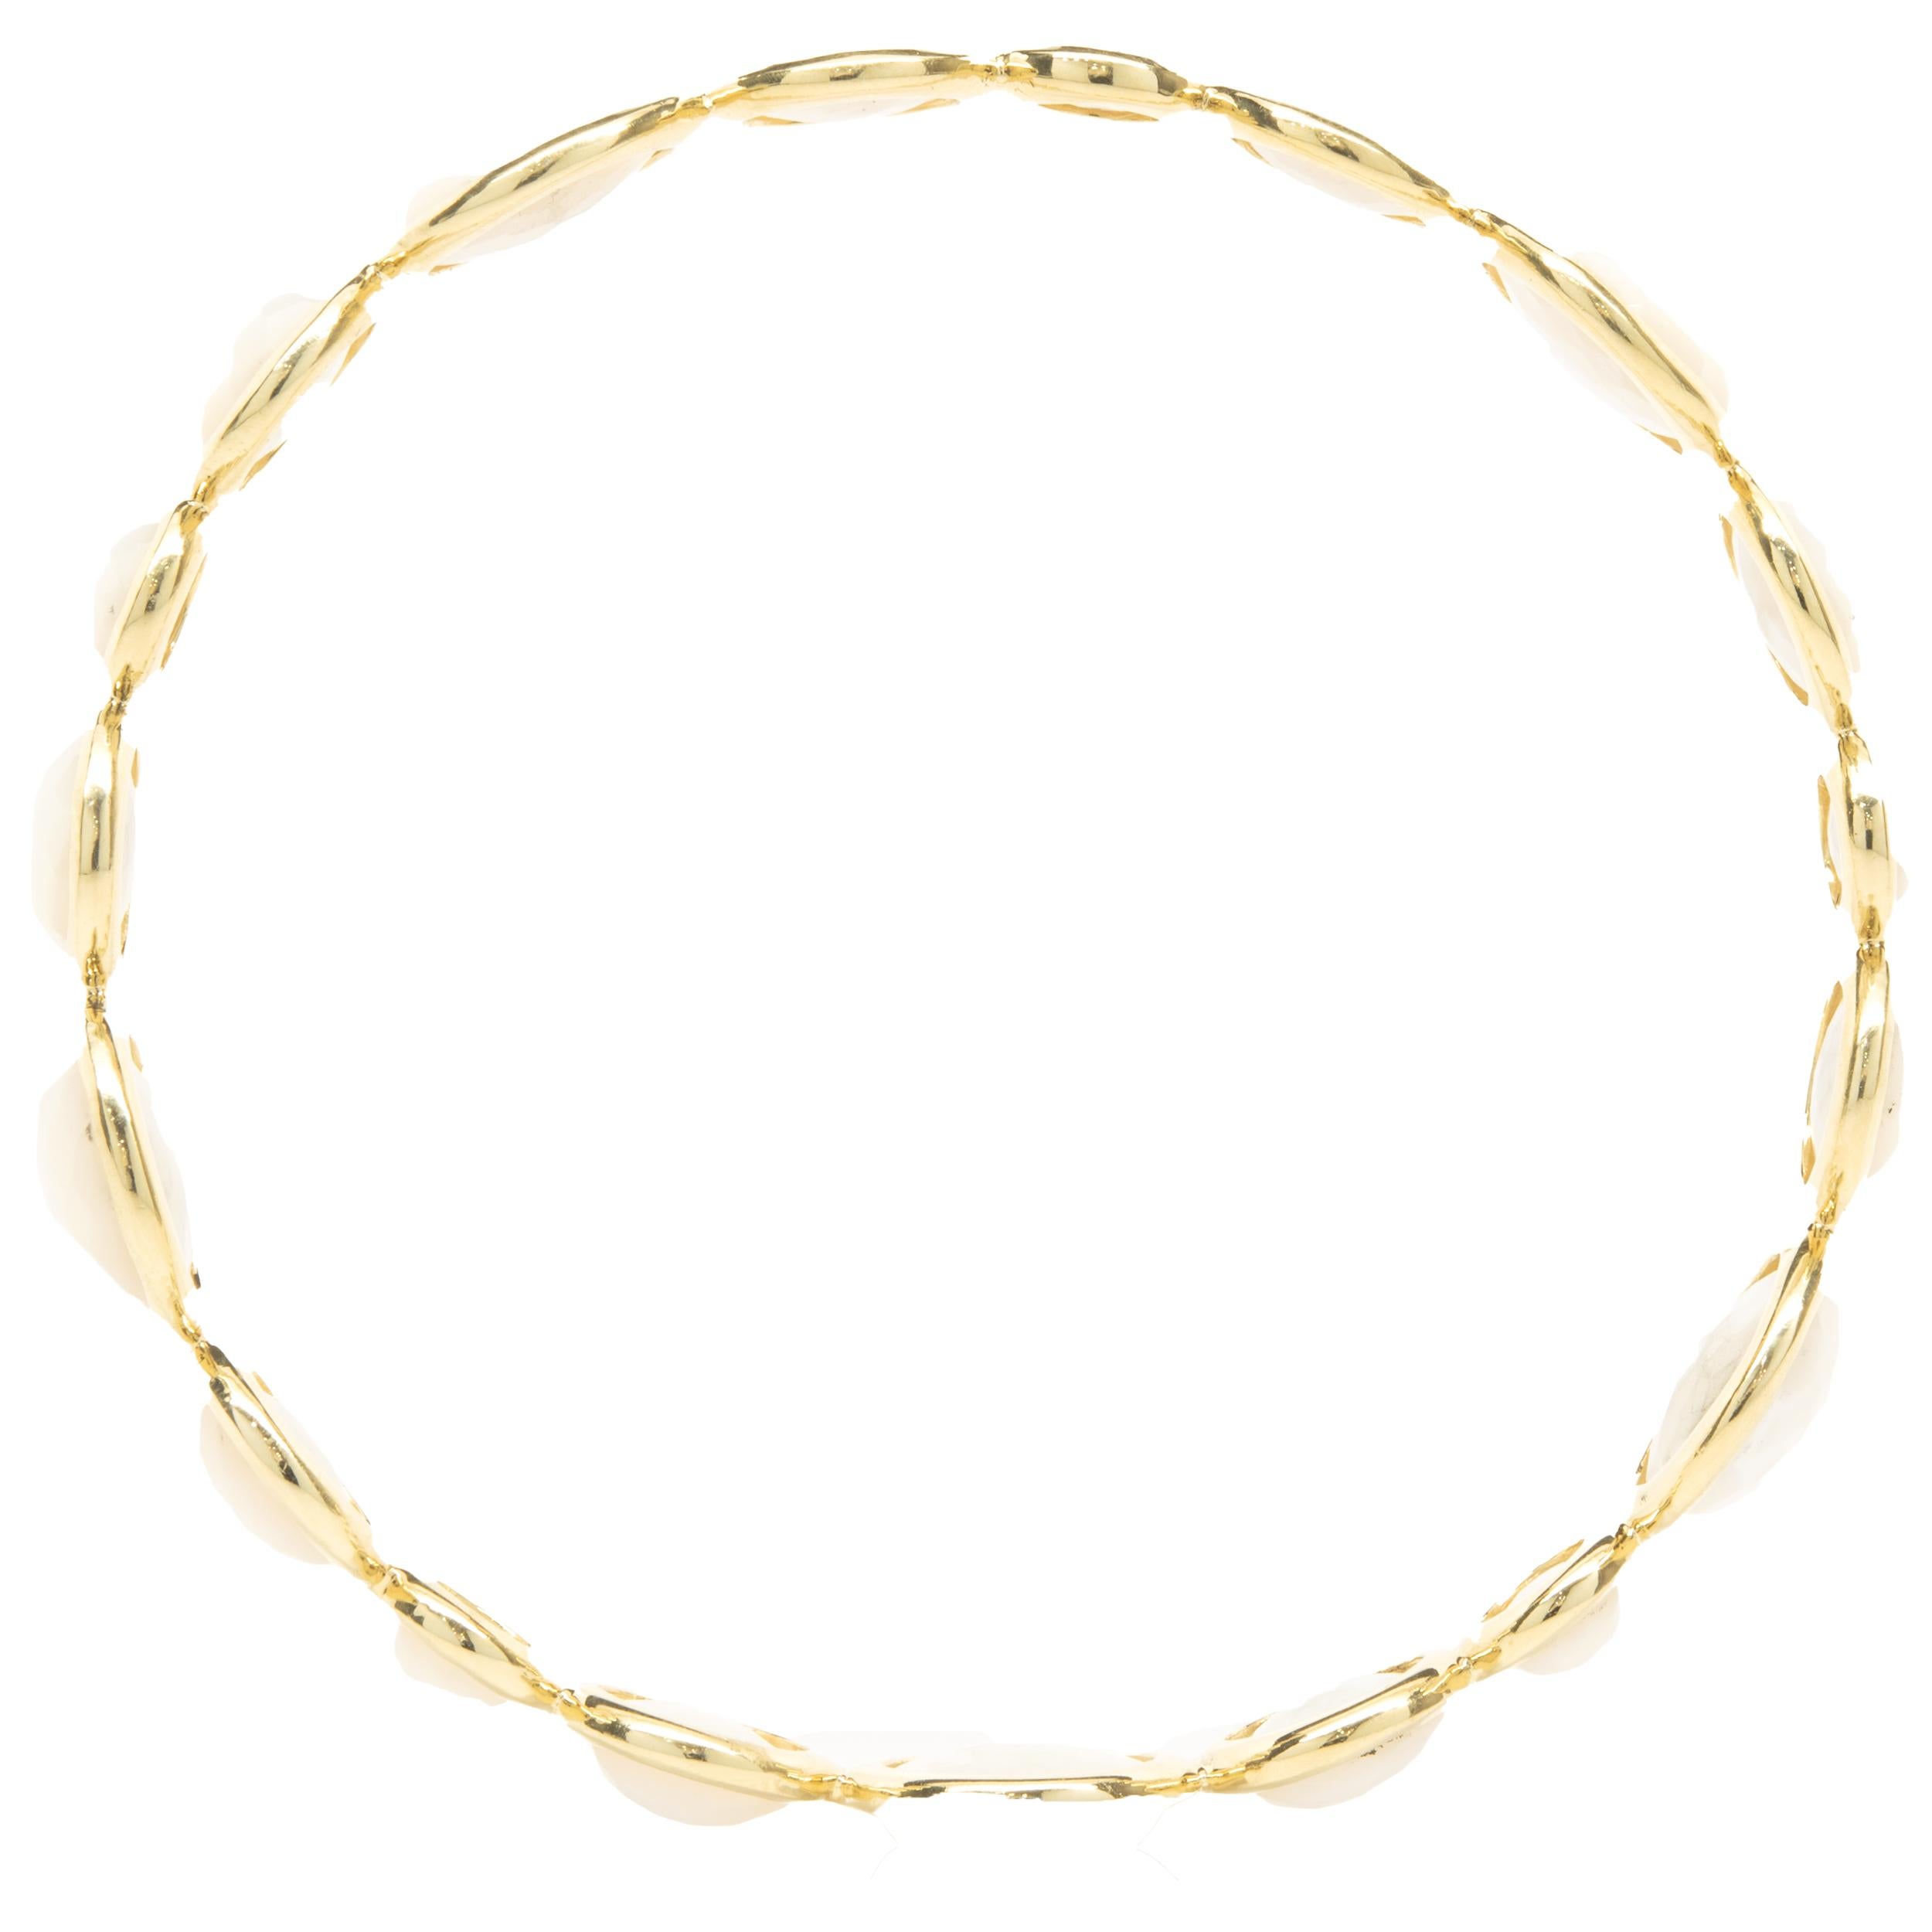 Designer: Ippolita
Material: 18K yellow gold
Weight:  32.02 grams
Dimensions: Bracelet will fit up to a 9-inch wrist